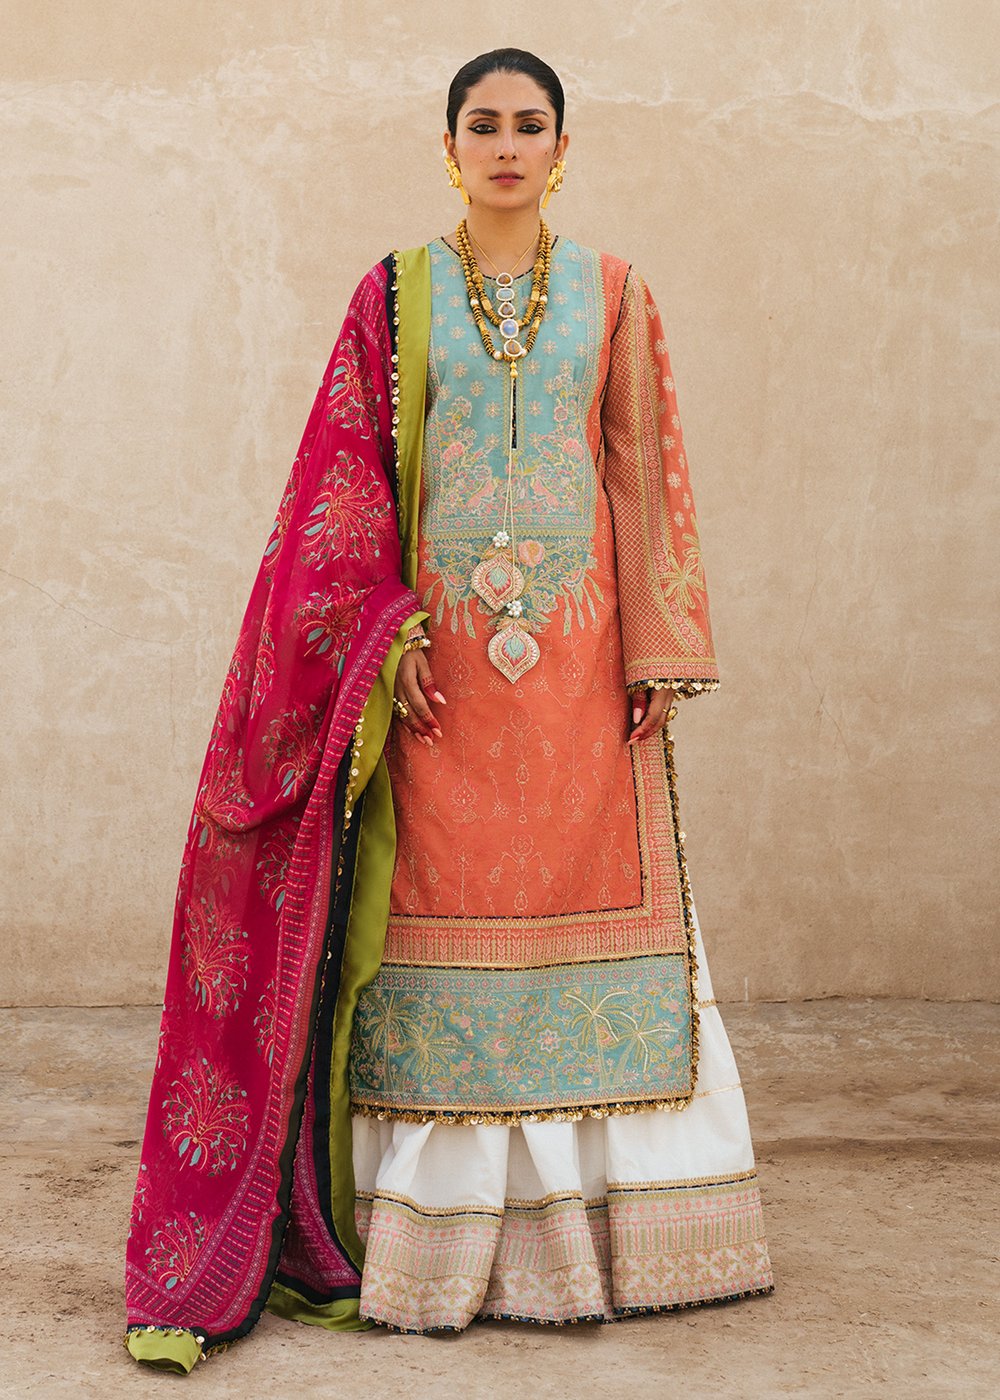 HUSSAIN REHAR | ROHI DE NAAL | Raag (Rust) Lawn dress is extremely trending for HUSAIN REHAR 2021 lawn. The PAKISTANI DRESSES IN UK are available for this wedding season. Get the exclusive customized Maria B, Asim Jofa Bridal, PAKISTANI WEDDING DRESSES from our PAKISTANI BOUTIQUE in UK, USA, Austria from Lebaasonline 